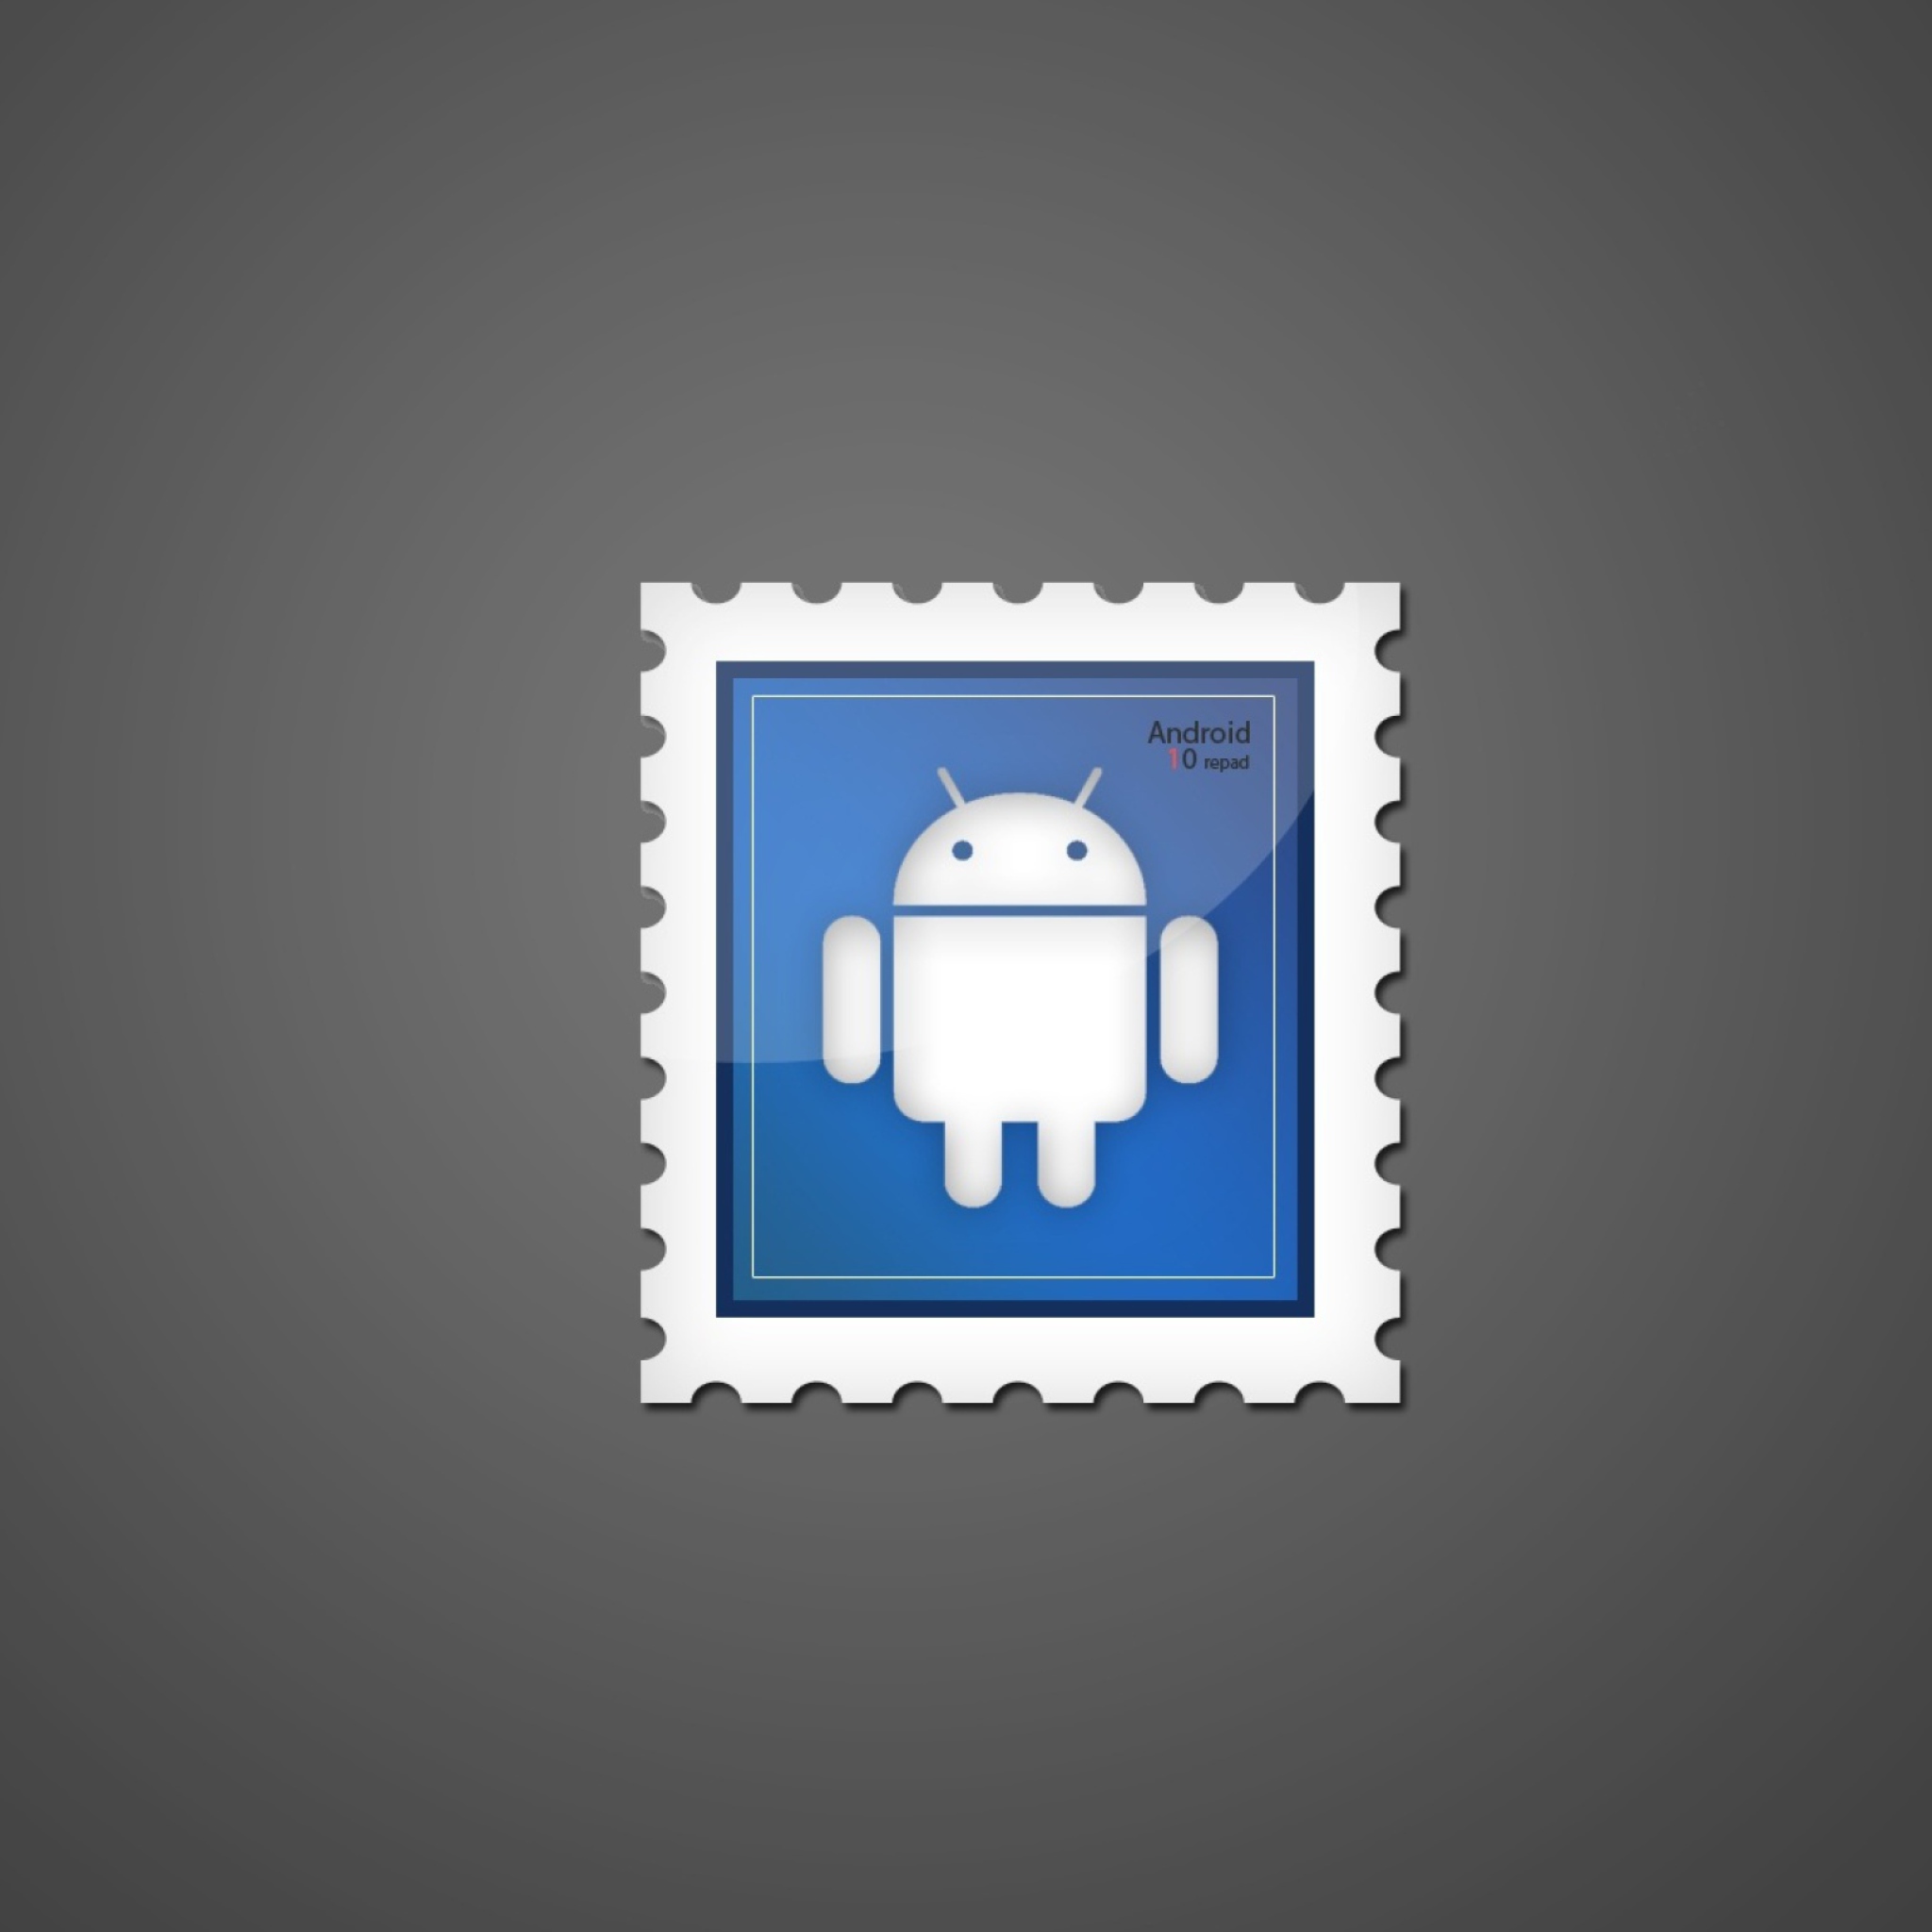 Android Postage Stamp wallpaper 2048x2048